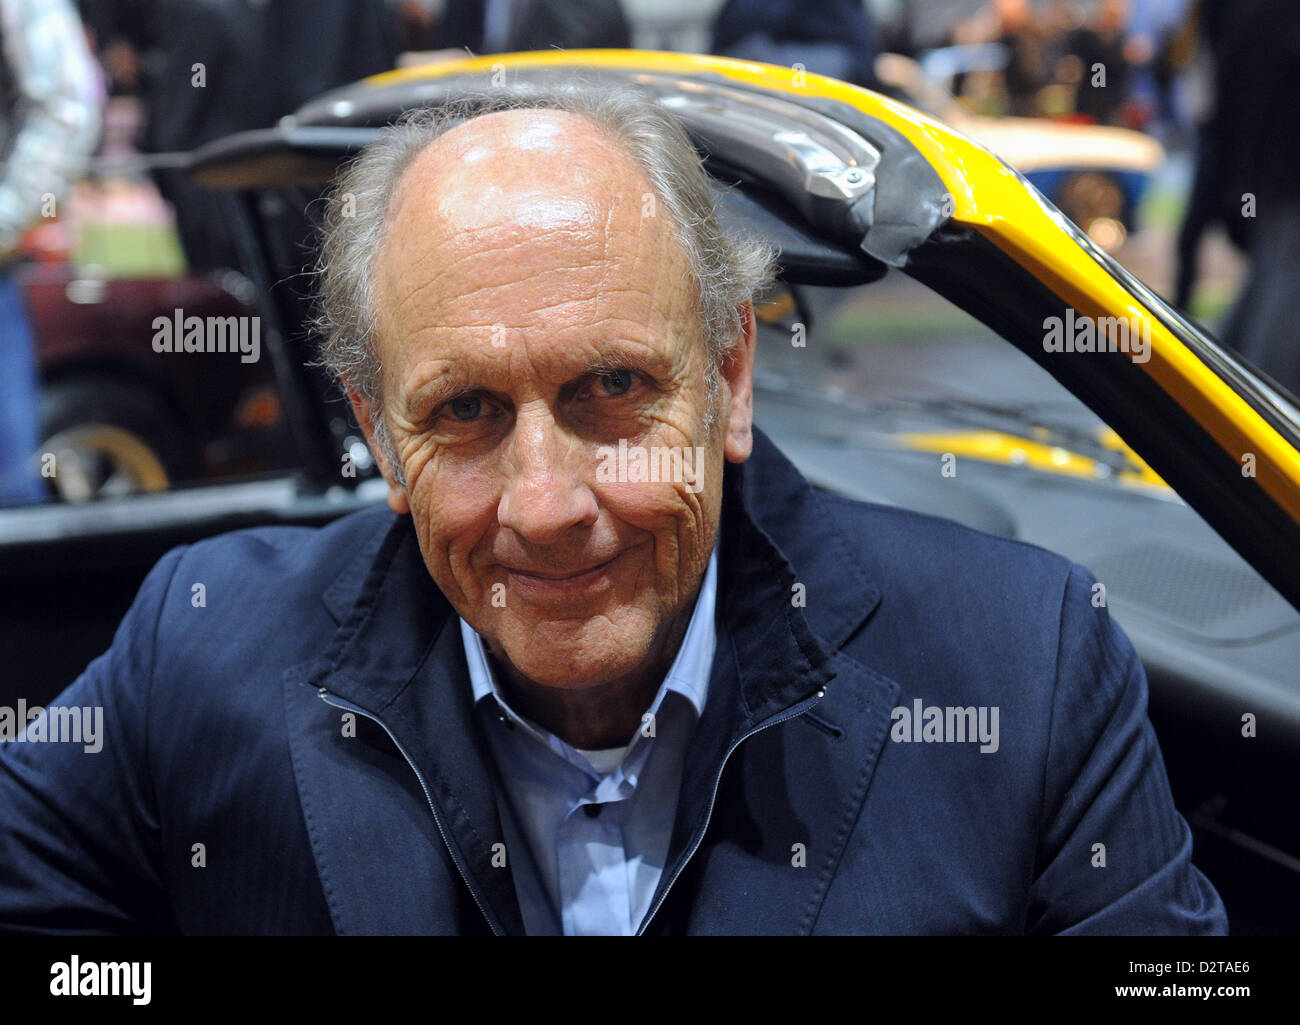 German racing Hans-Joachim Stuck sits in a Porsche 911 Targa from 1972 as honorary guest of the at the Bremen Classic Motorshow in Bremen, Germany, 01 February 2013. This year's motto of the oldtimer trade show, which will take place from 01 till 03 February 2013, is 'Races and Rallye: The Wild Years'. Photo: INGO WAGNER Stock Photo